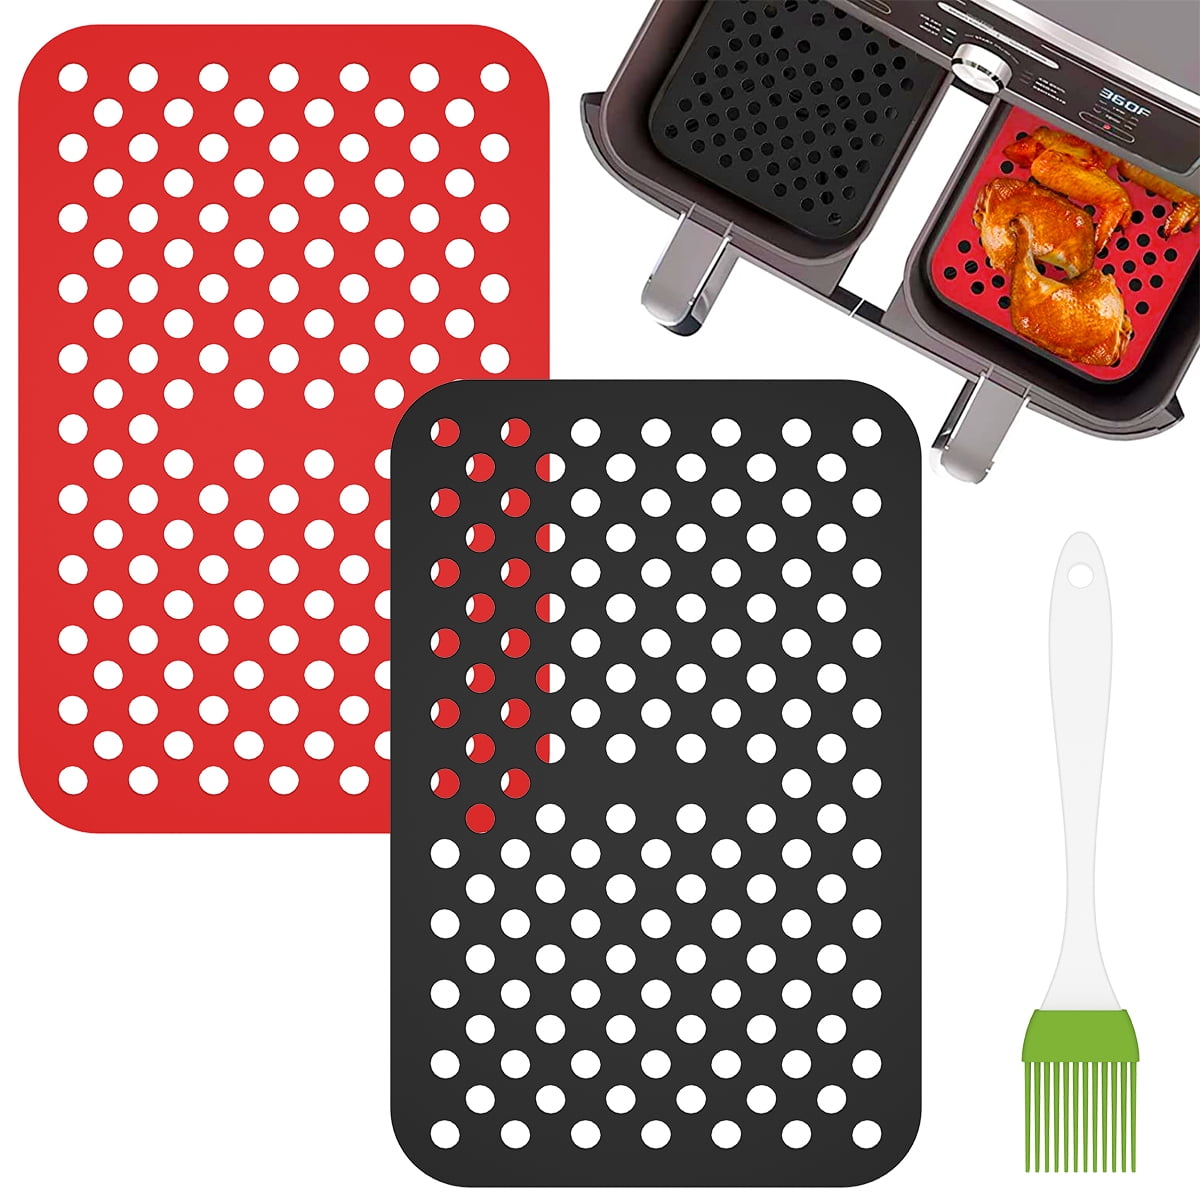  KitchenRaku Silicone Baking Mat Roll, Non-slip Silicone Pastry  Mat, Non-Stick Reusable Air Fryer Liner, Freeze Dryer Mat, Heat Resistant  Mat, Drawer Liner, Countertop Protector Mat, Oven Liner: Home & Kitchen